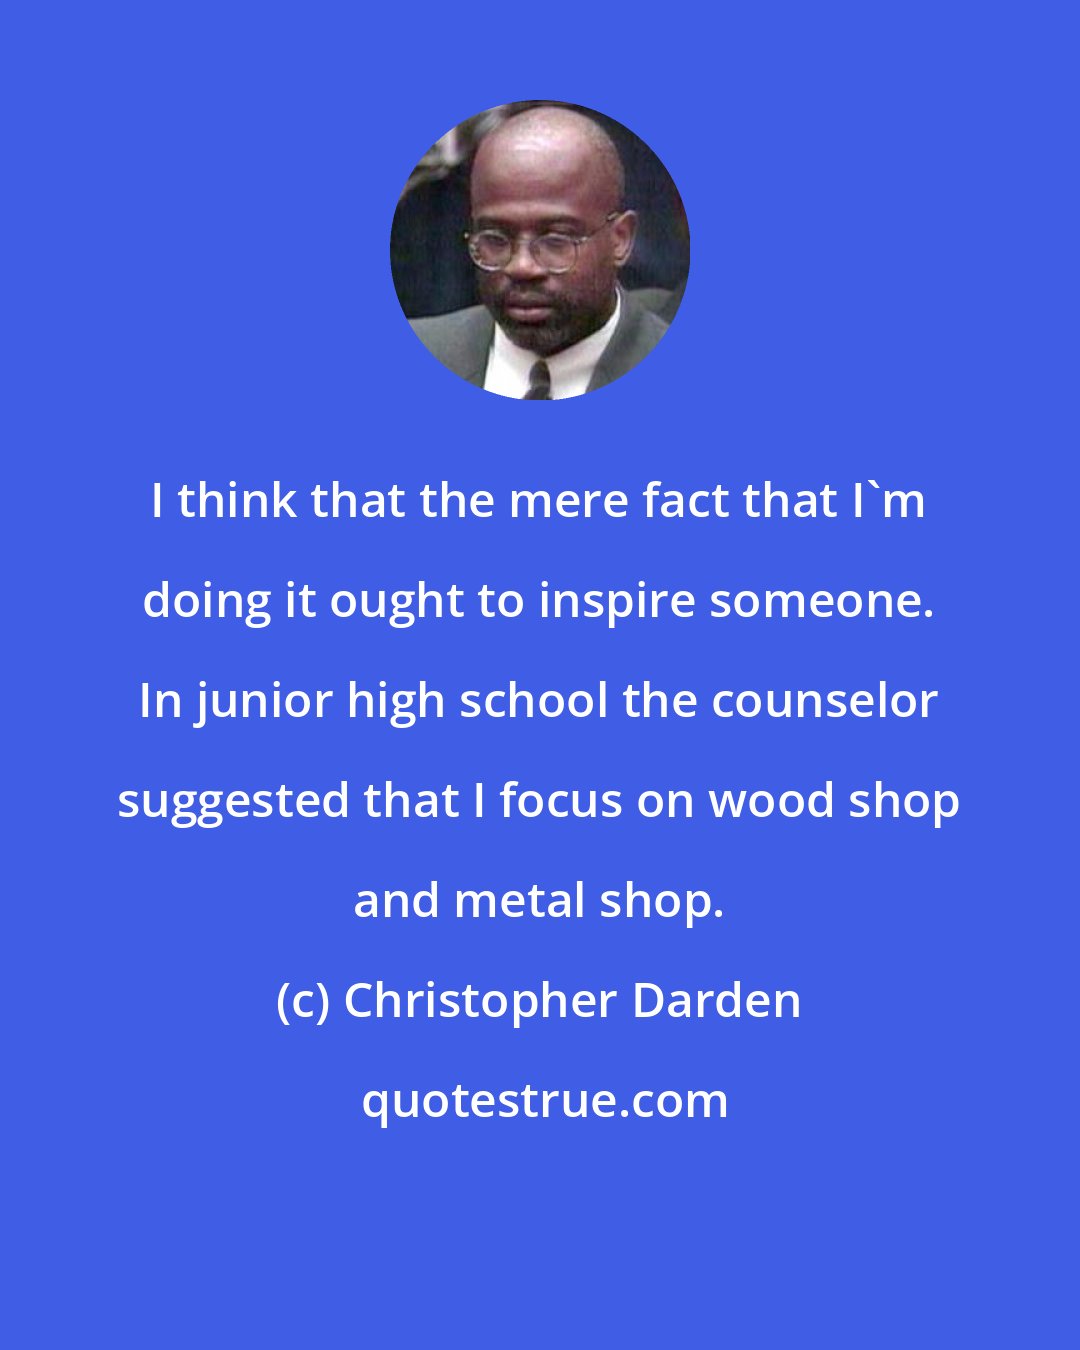 Christopher Darden: I think that the mere fact that I'm doing it ought to inspire someone. In junior high school the counselor suggested that I focus on wood shop and metal shop.